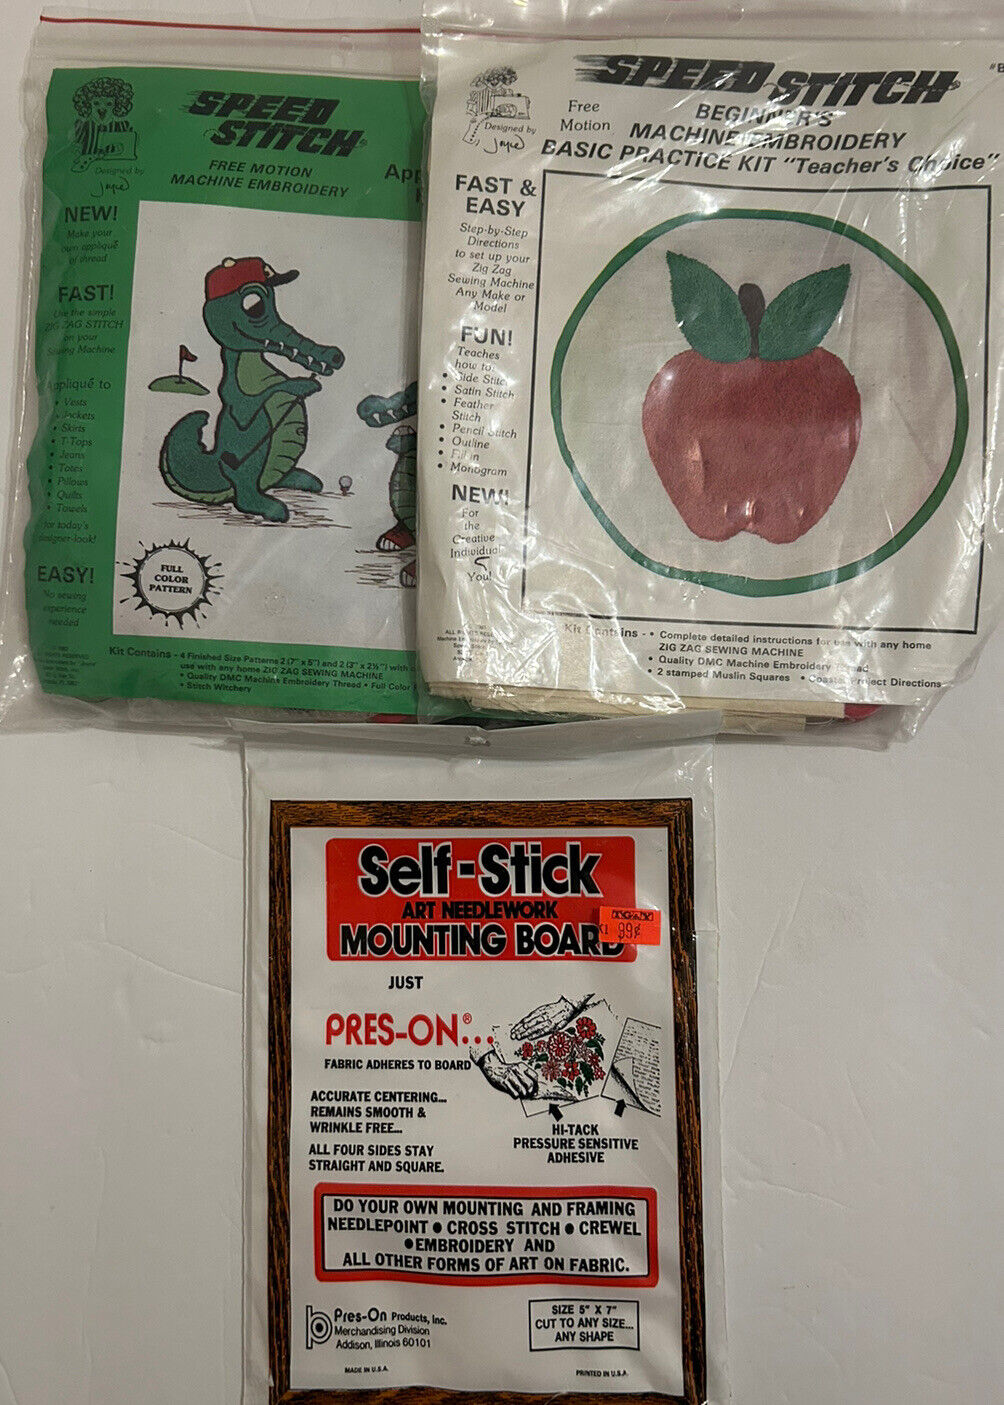 Lot Of 2 Vintage 1981 Speed Stitch Beginners Machine Embroidery Kit